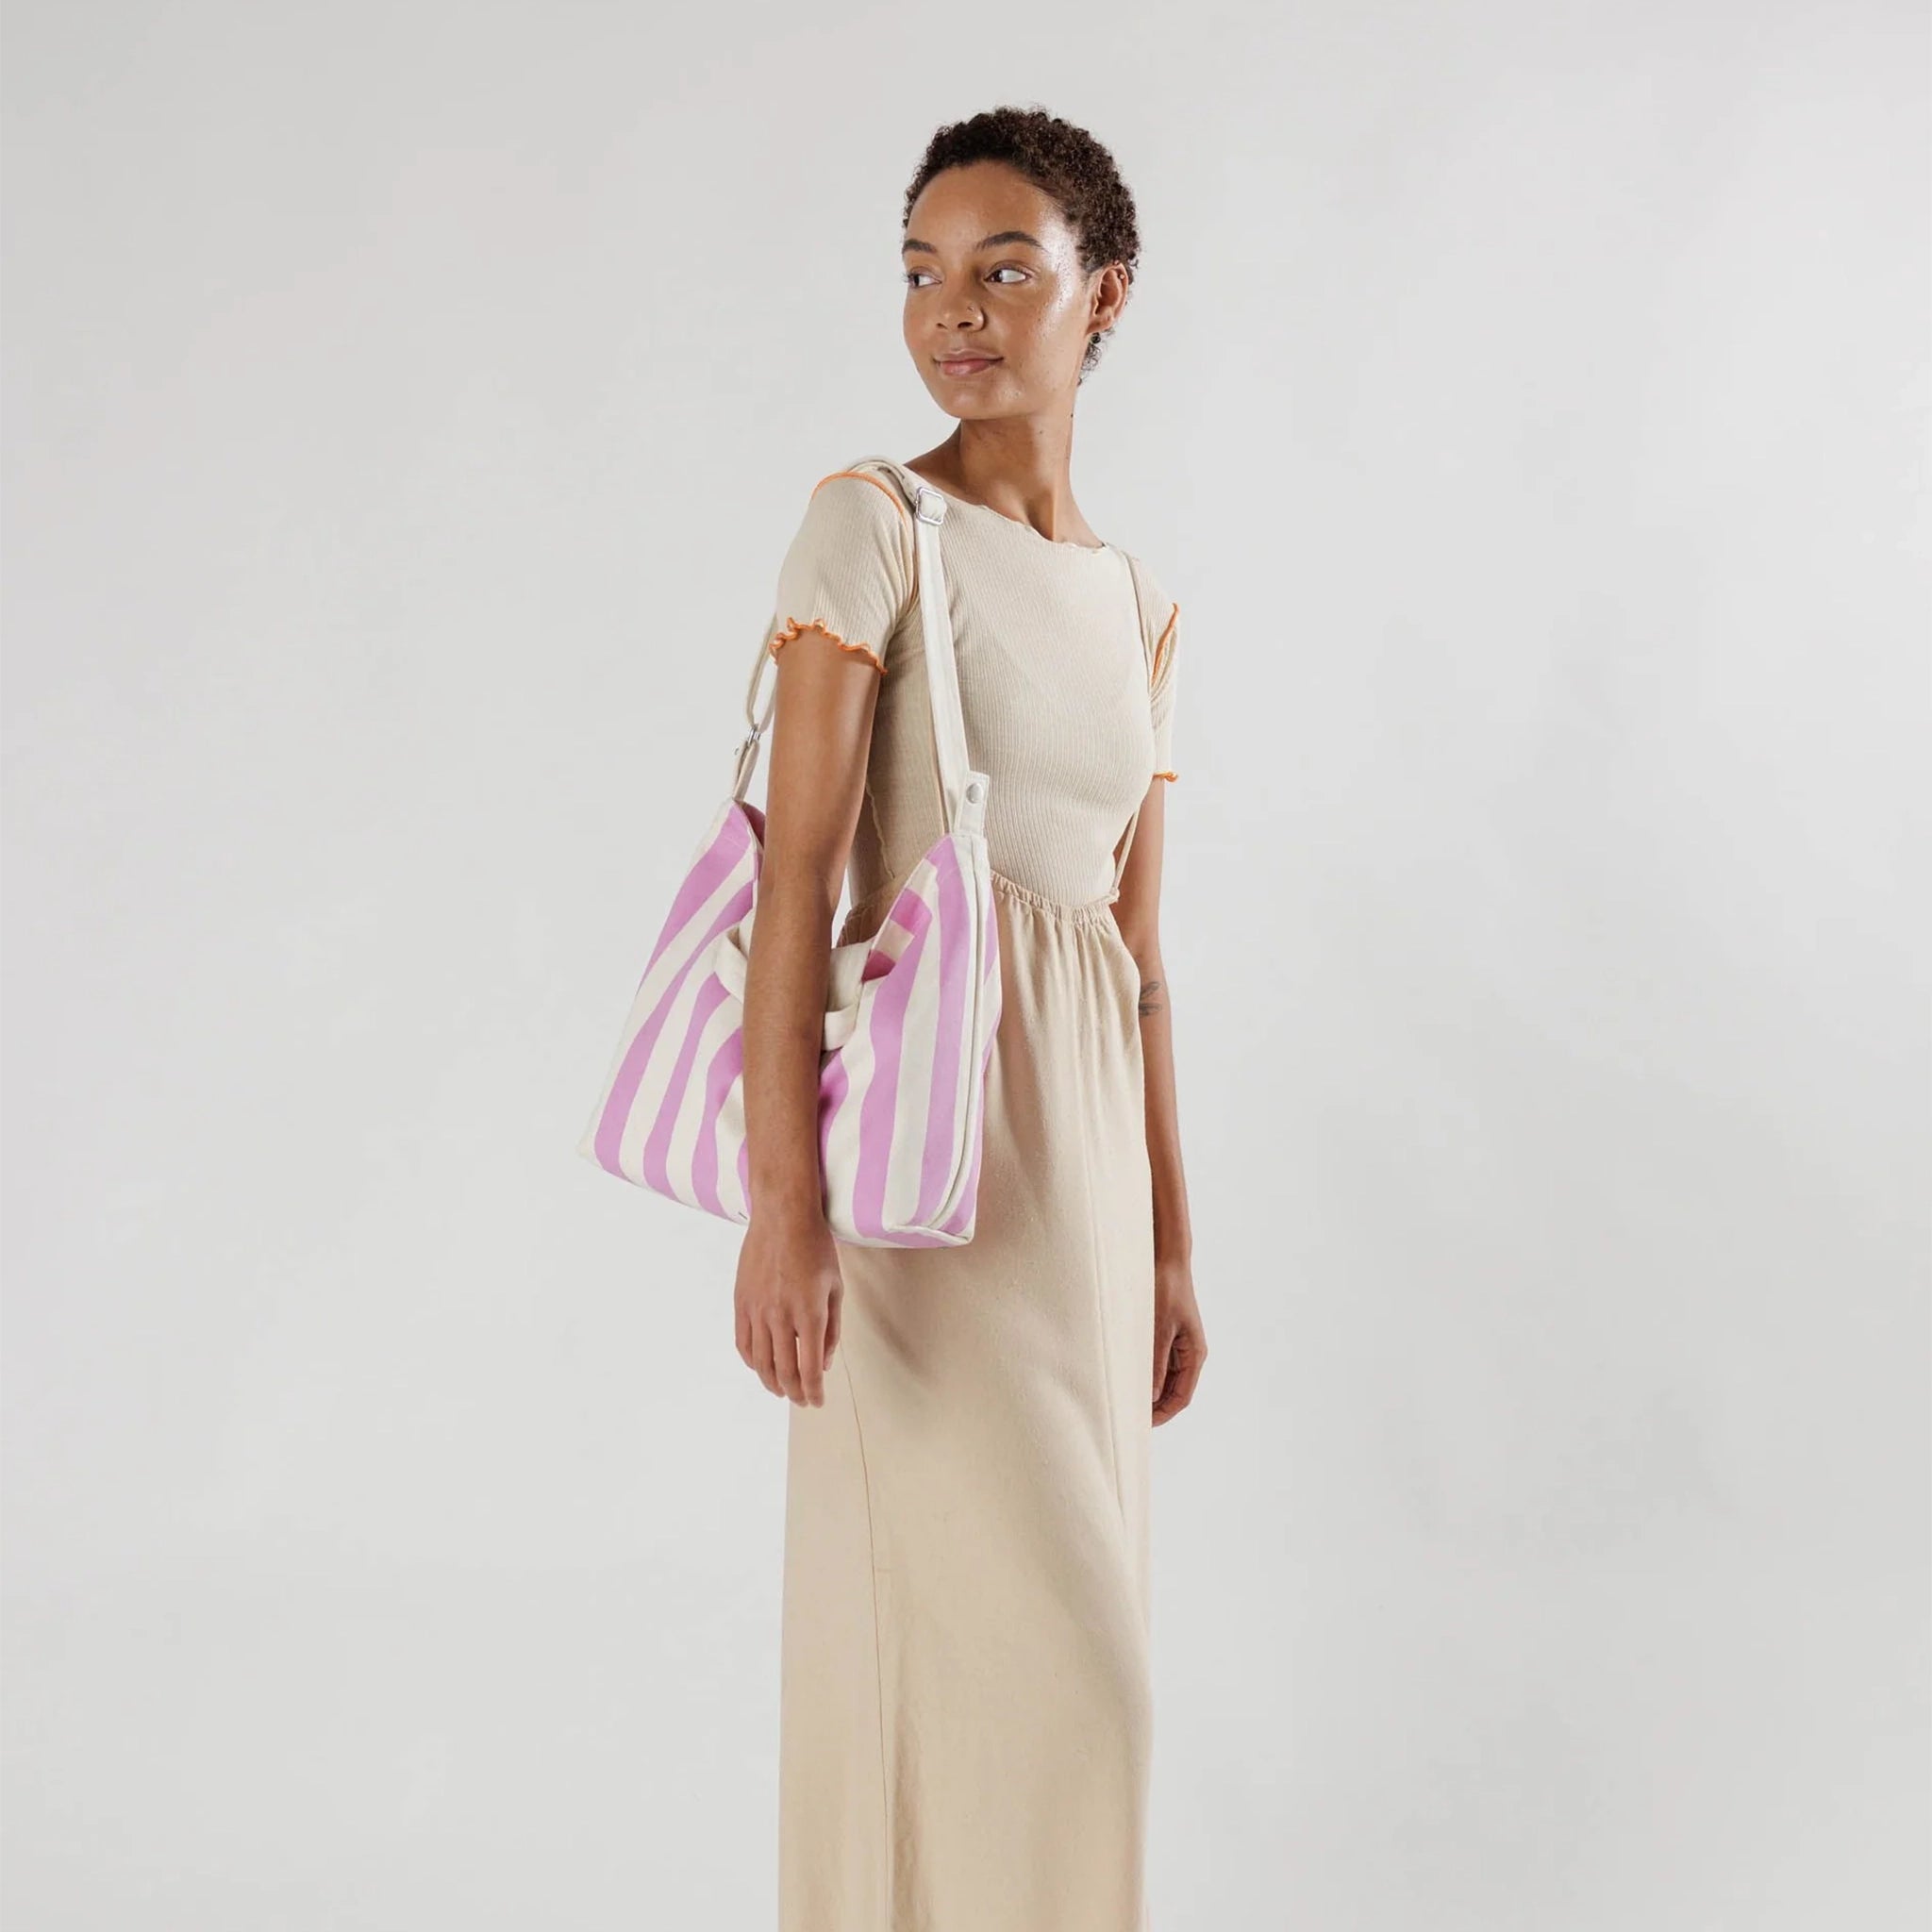 On a white background is a square tote bag with white and hot pink stripes along with two handles and a longer crossbody or shoulder strap.